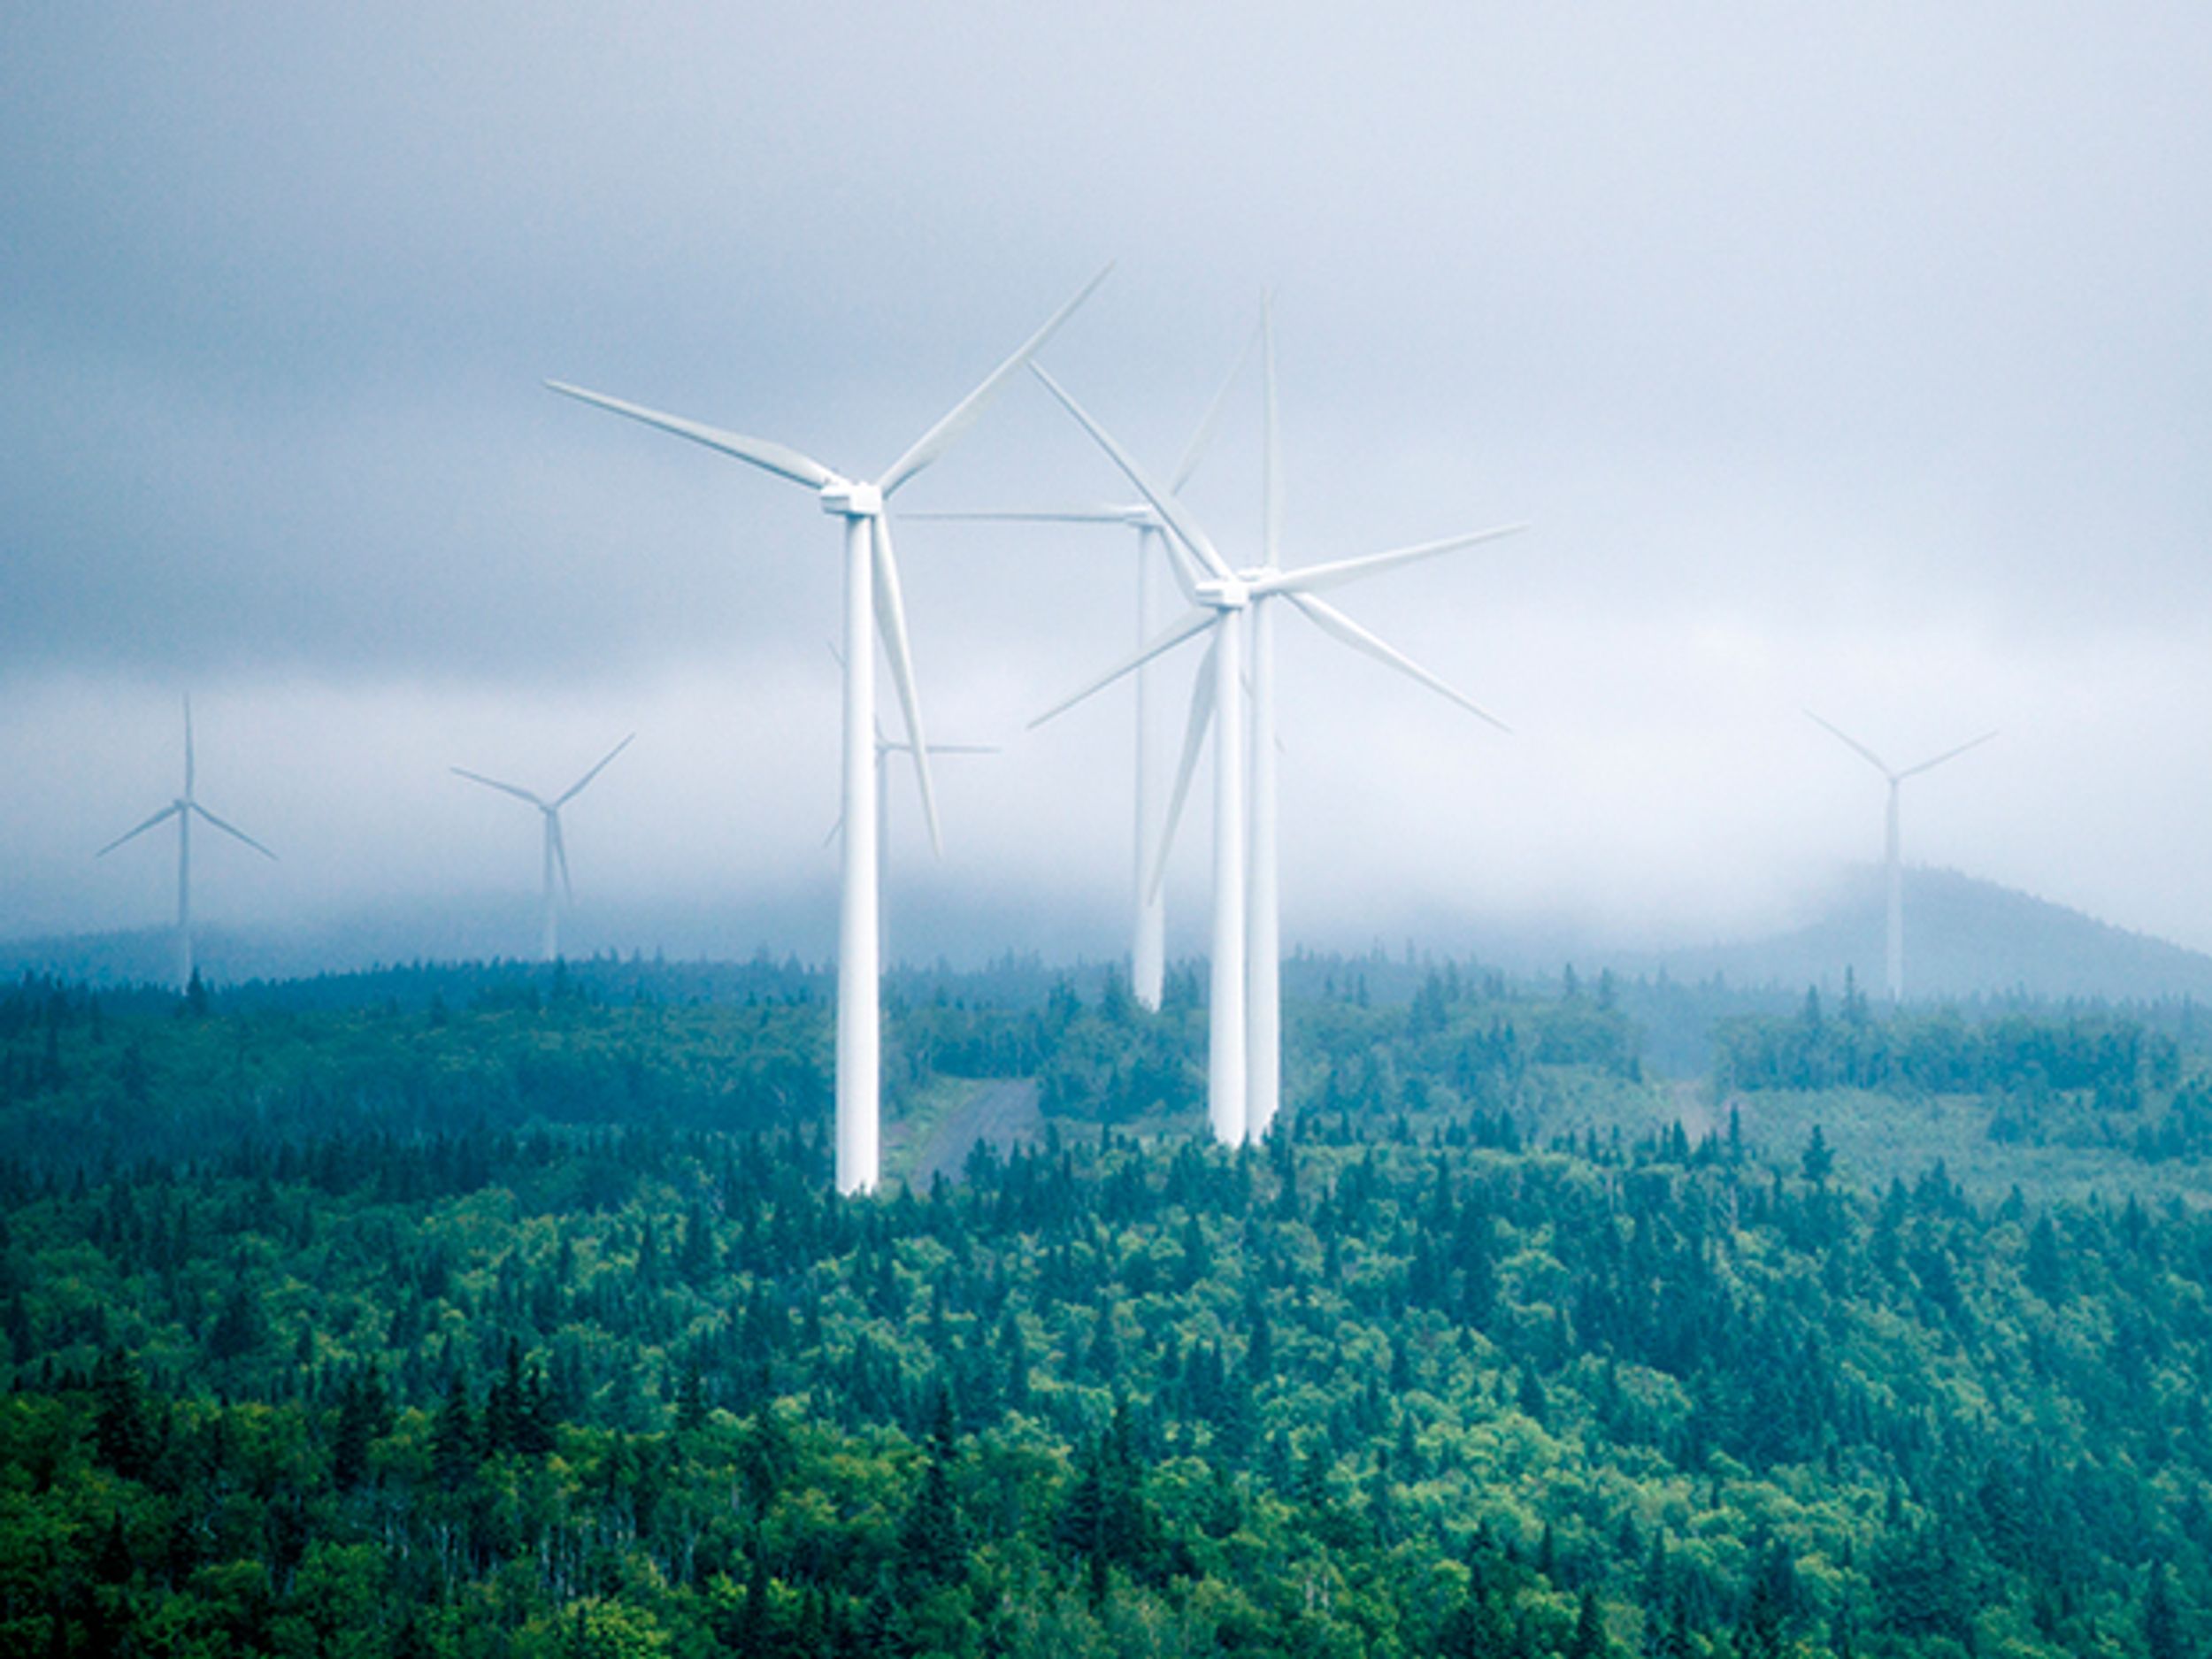 Quebec's wind farms can produce bursts of power to stabilize AC grid frequency